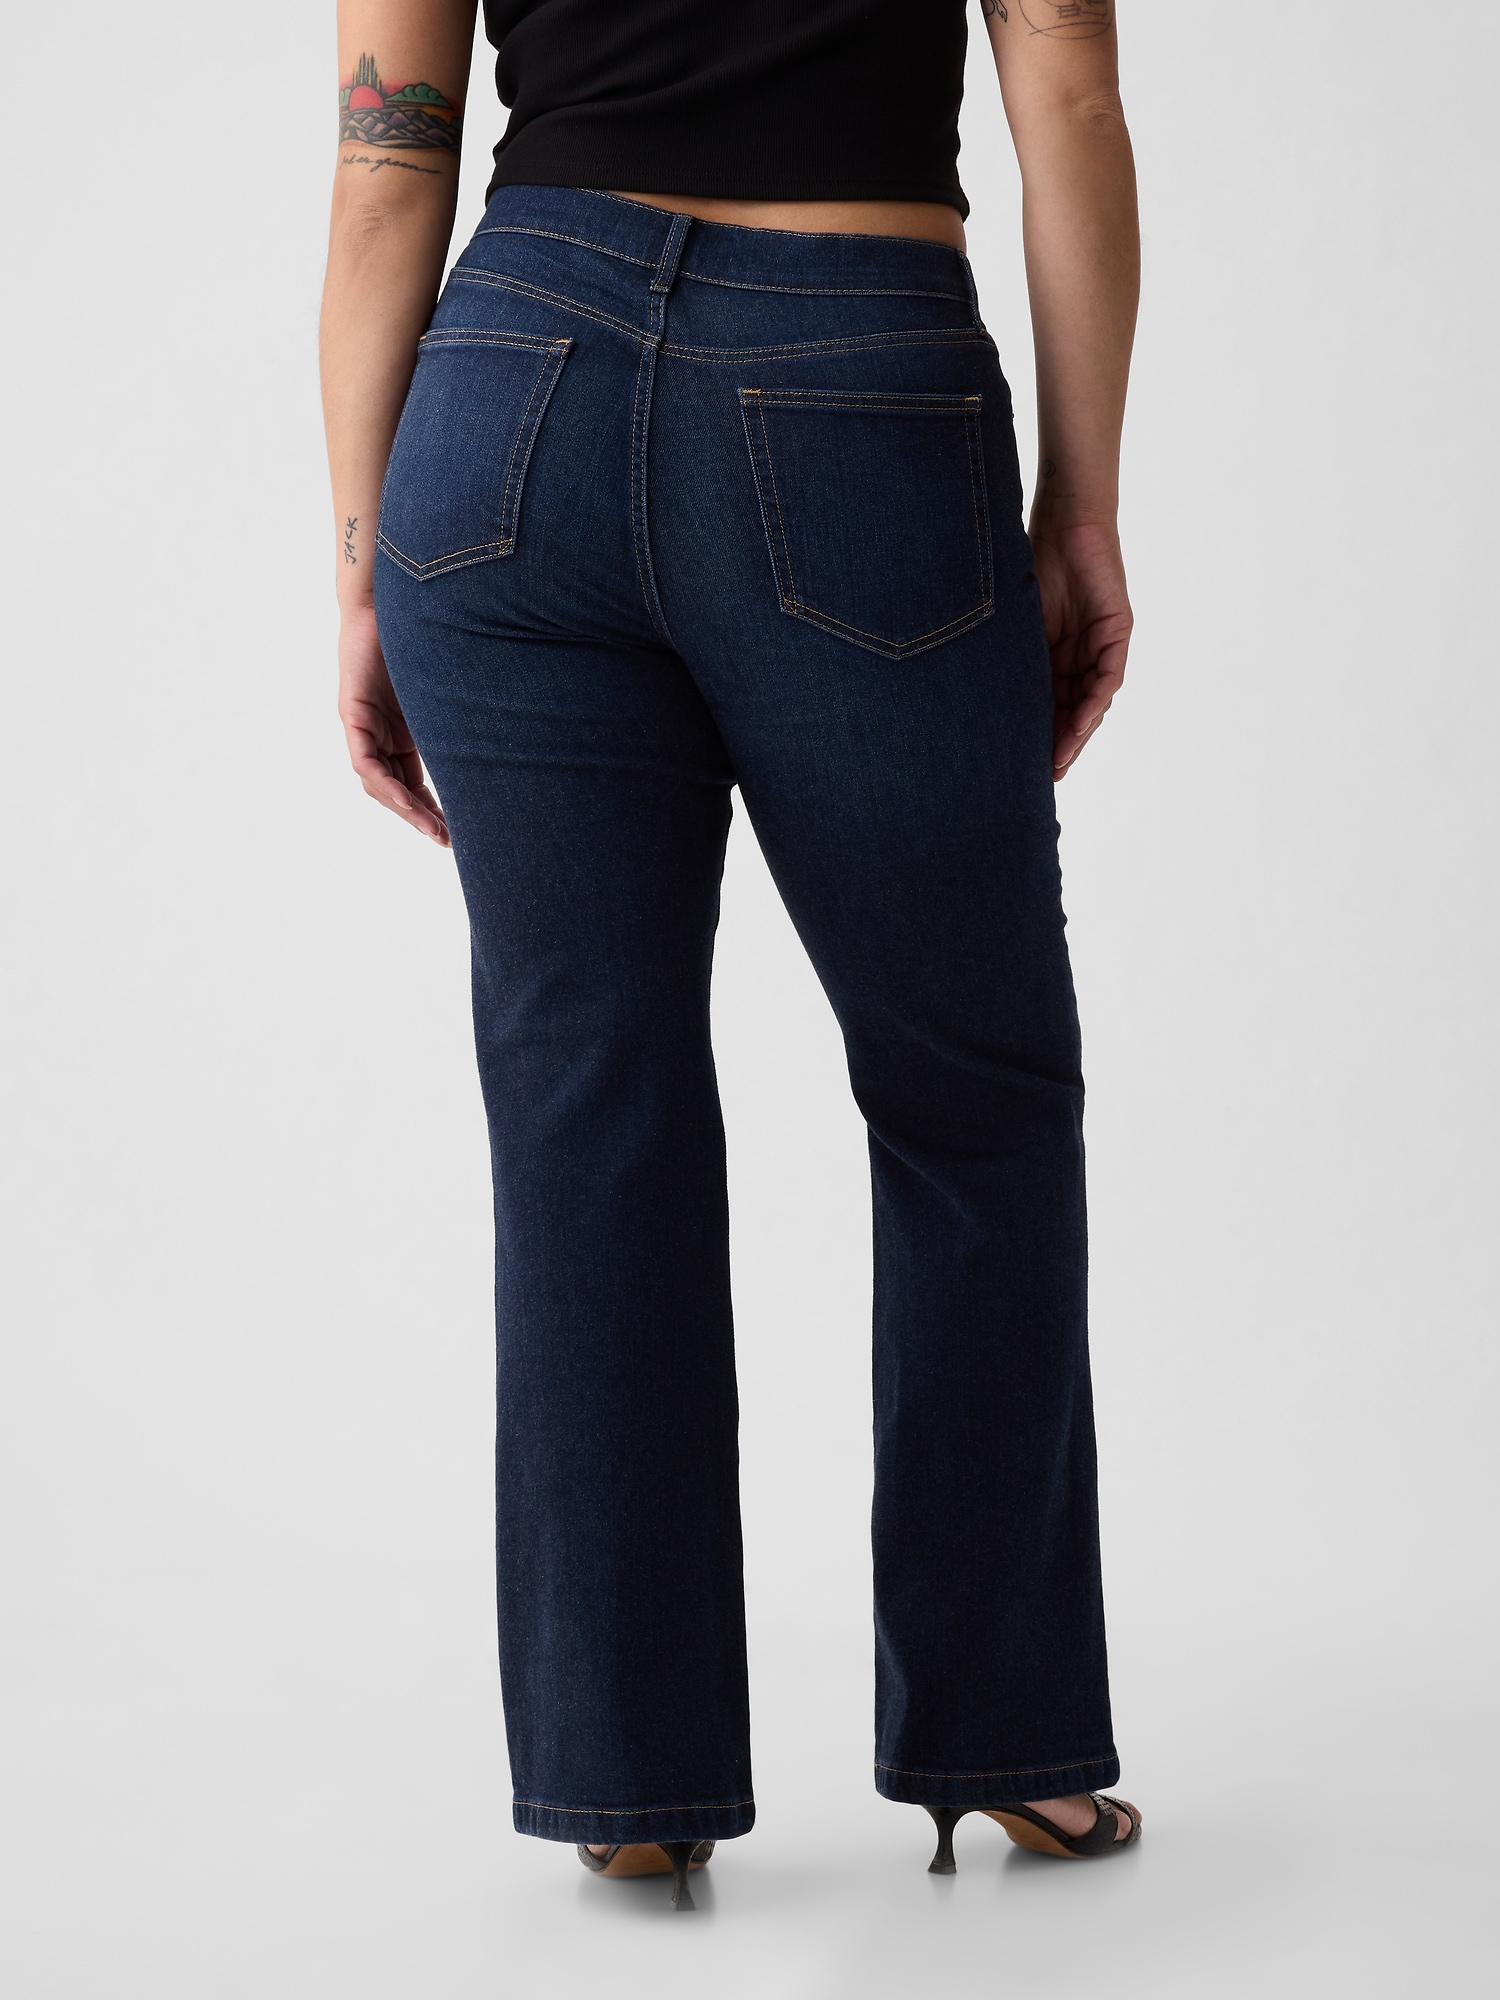 Petite High Rise Palazzo Jeans in Mid Indigo Wash